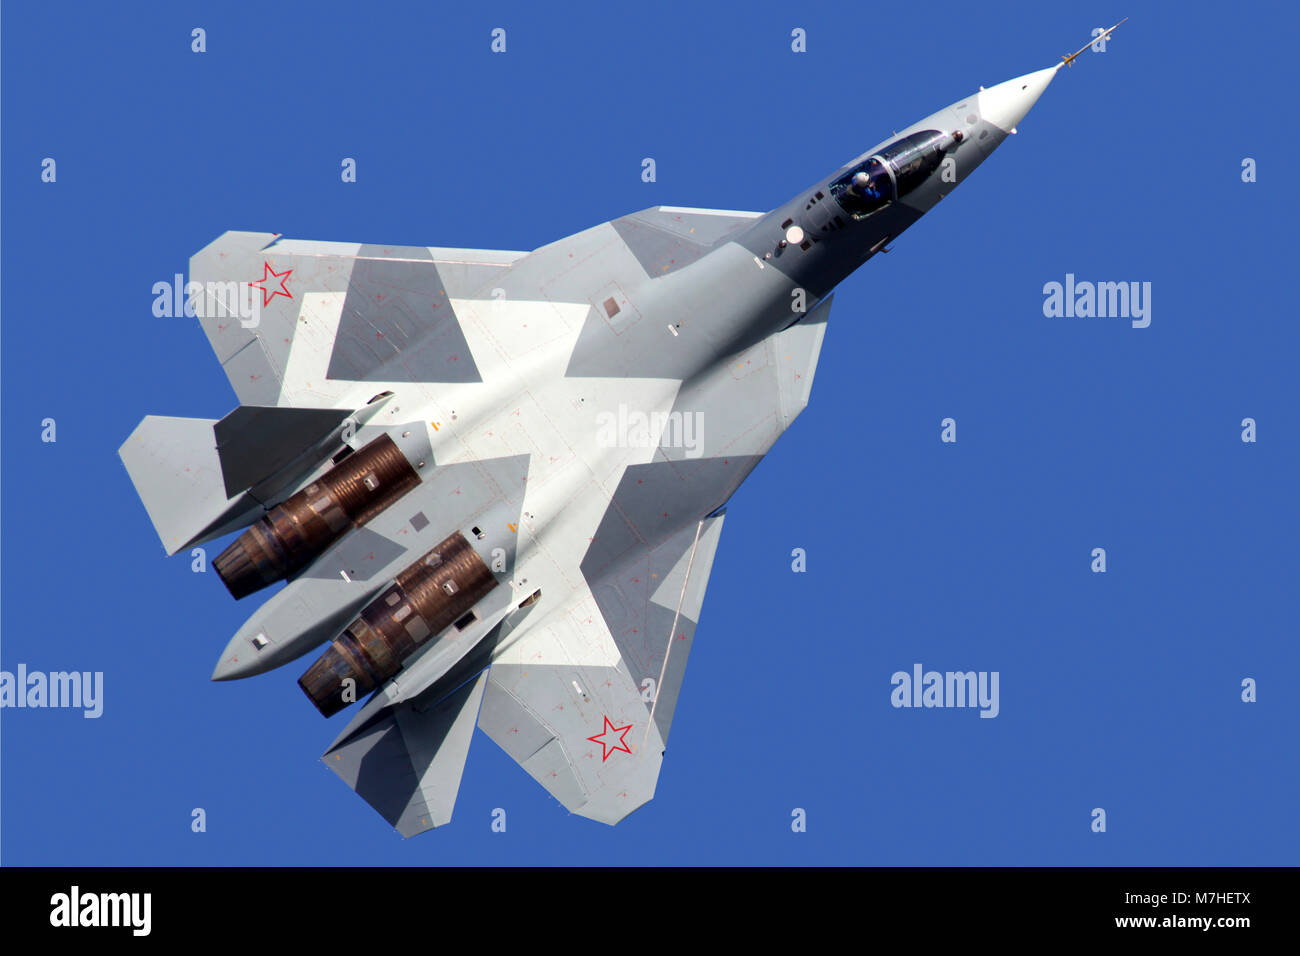 T-50 PAK-FA 051 BLUE fifth generation jet fighter of the Russian Air Force  Stock Photo - Alamy